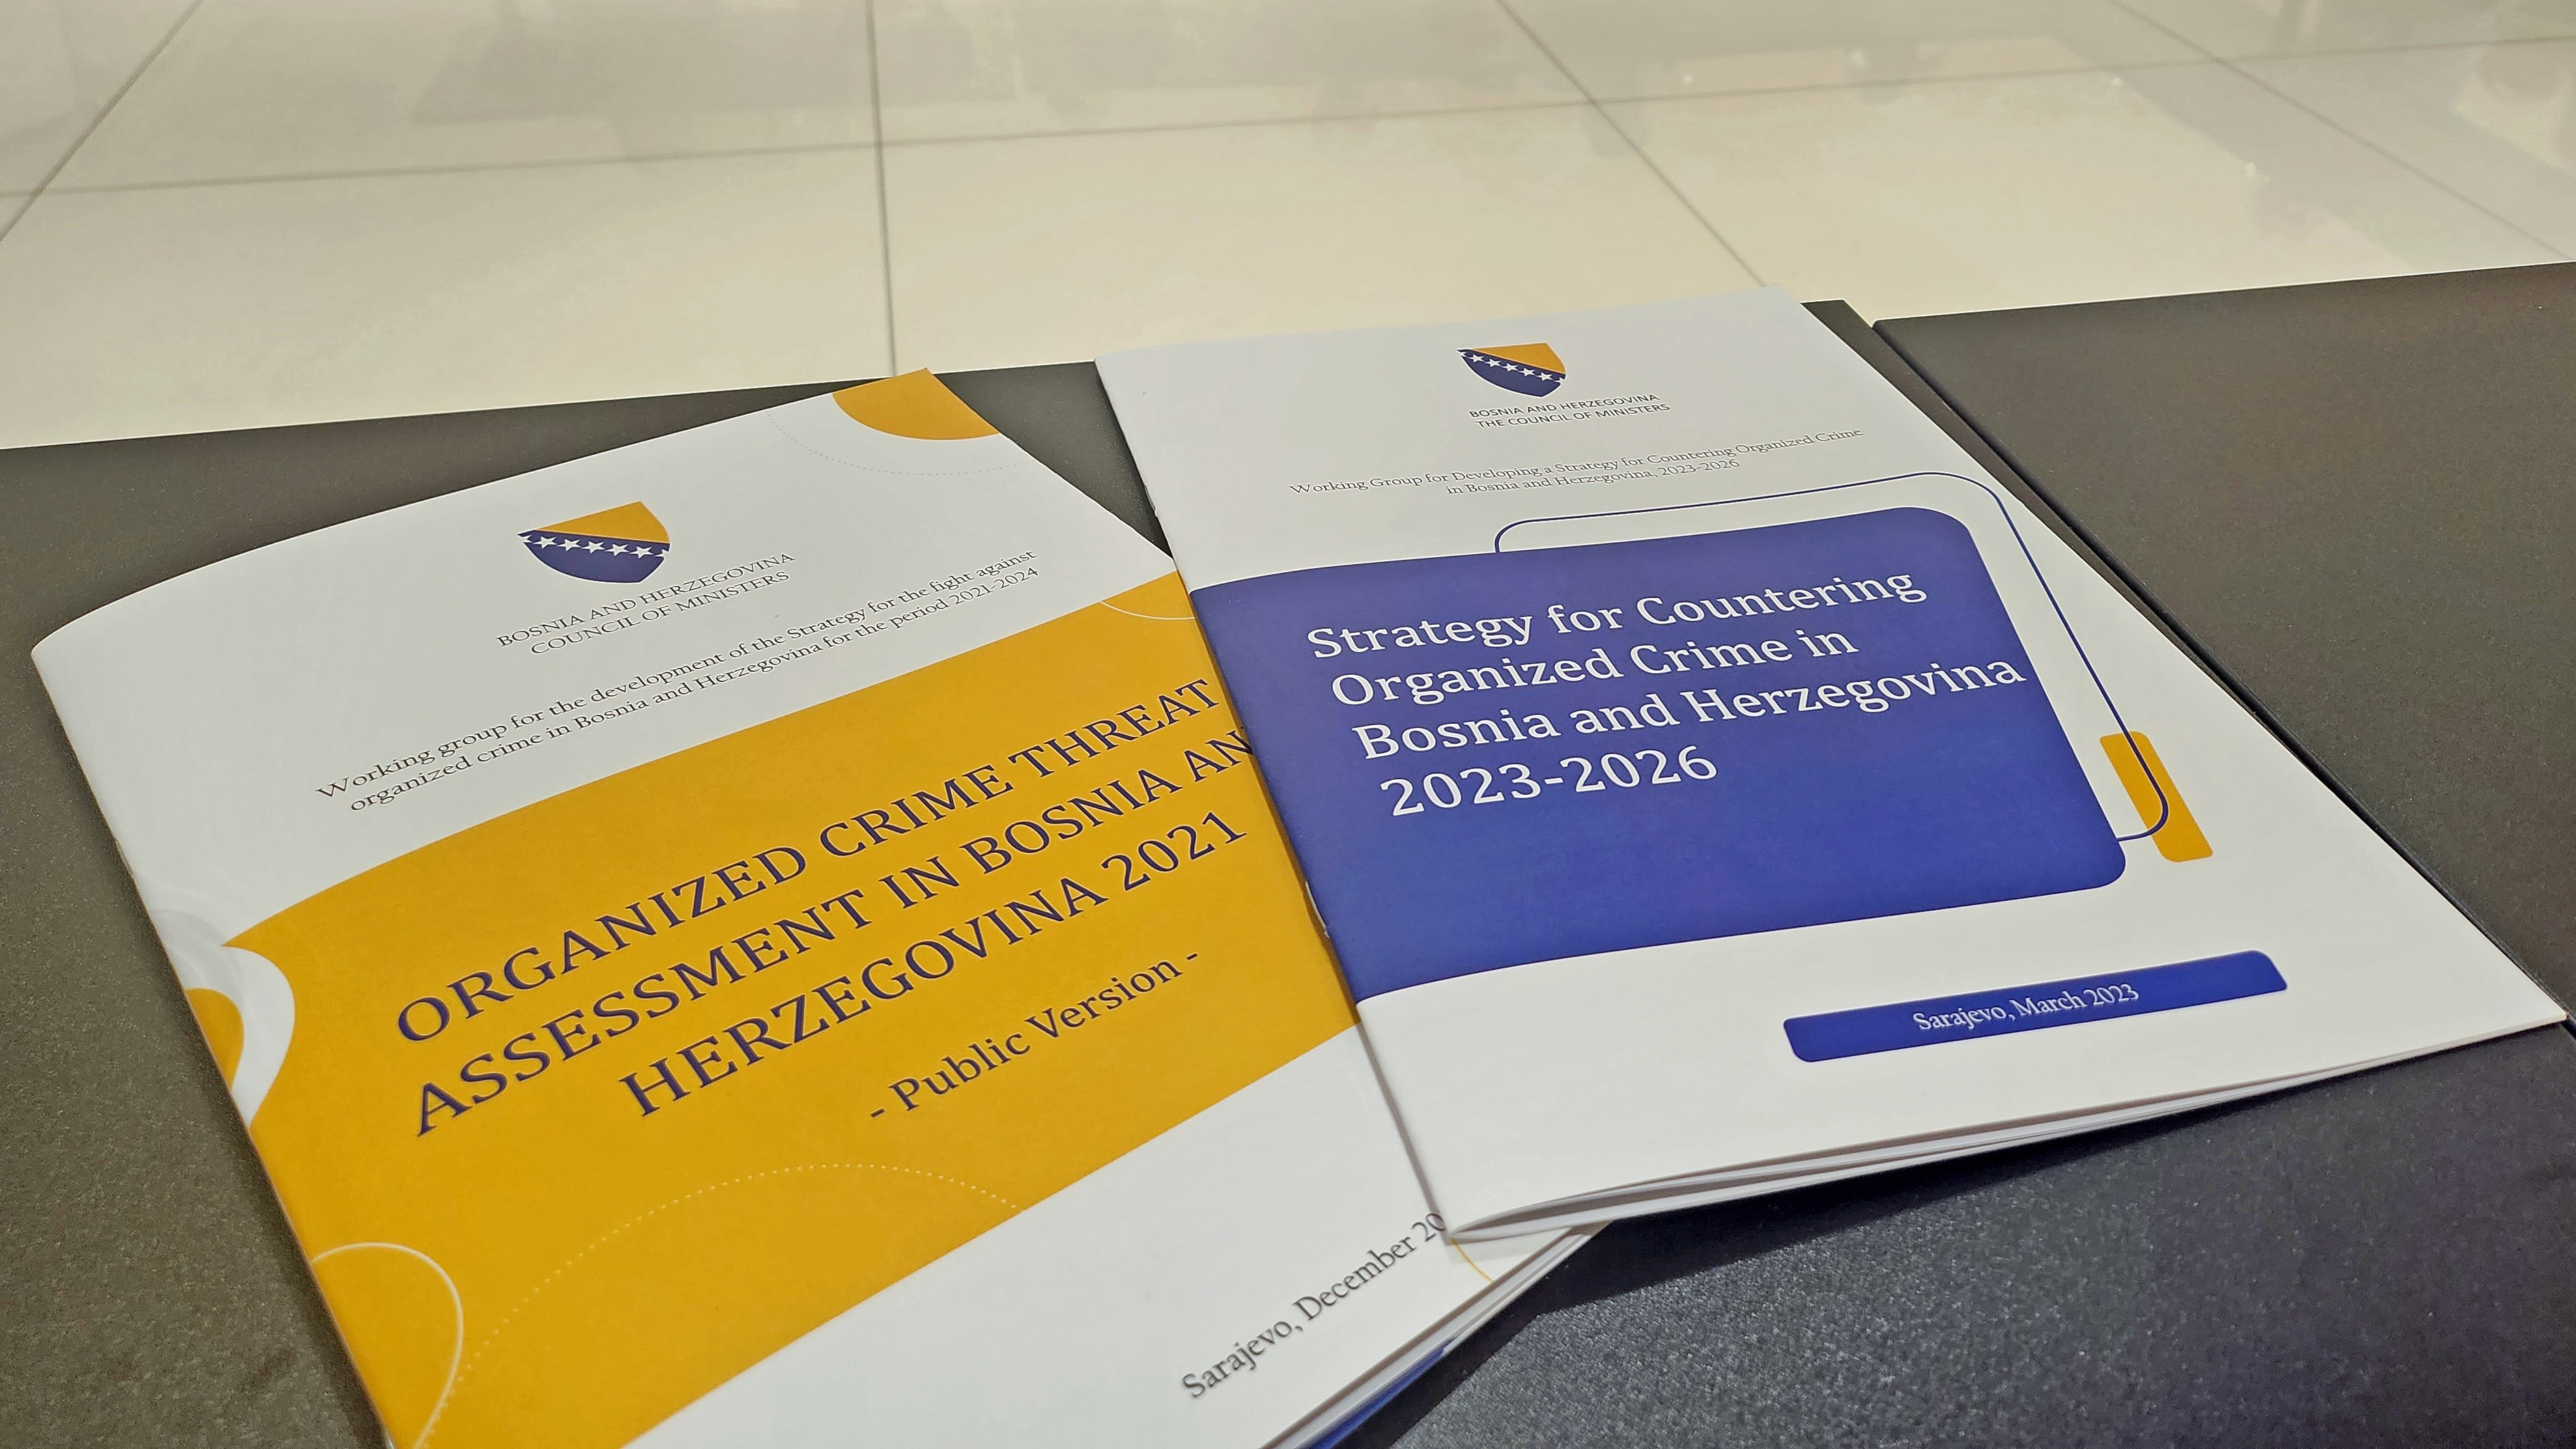 On a table, two publications: "Organized Crime Threat Assessment in Bosnia and Herzegovina 2021 - Public Version" and "Strategy for Countering Organized Crime in Bosnia and Herzegovina 2023-2026". 